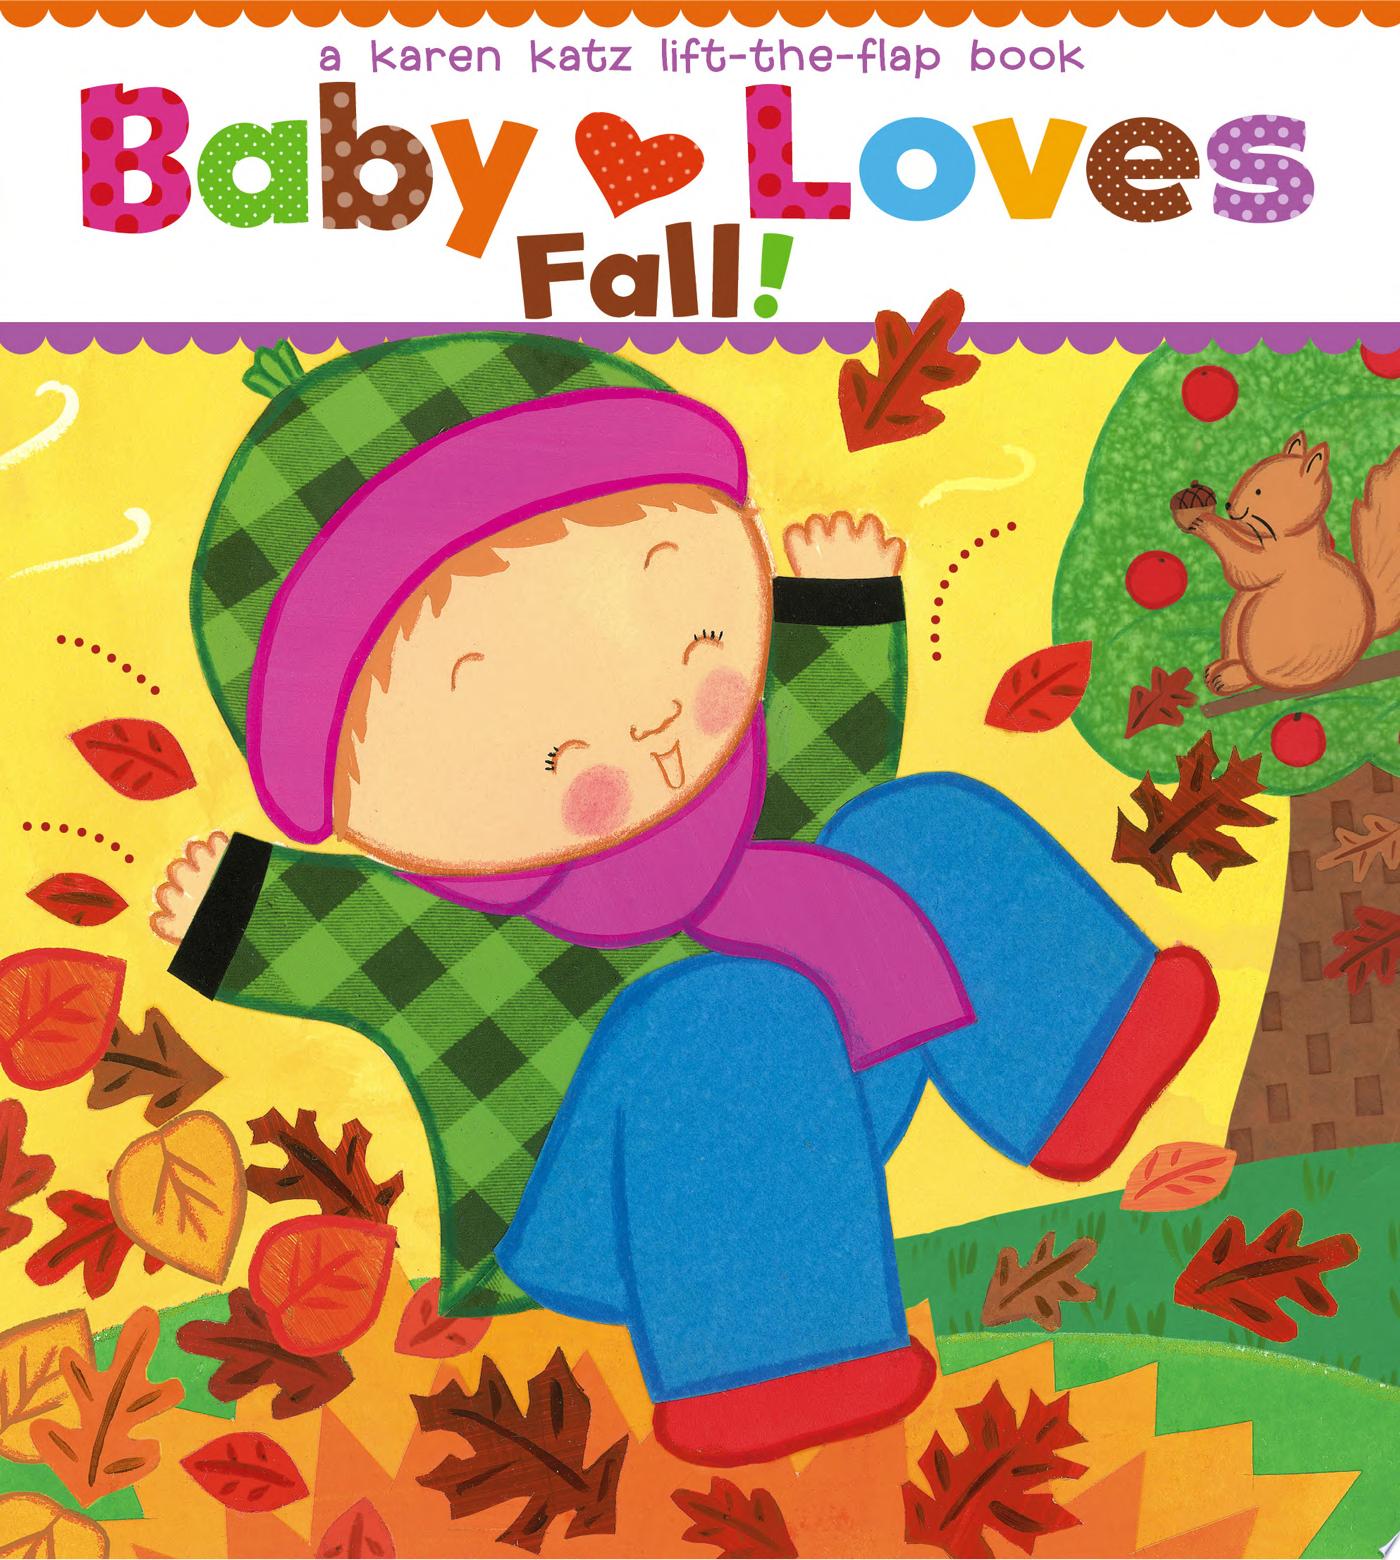 Image for "Baby Loves Fall!"